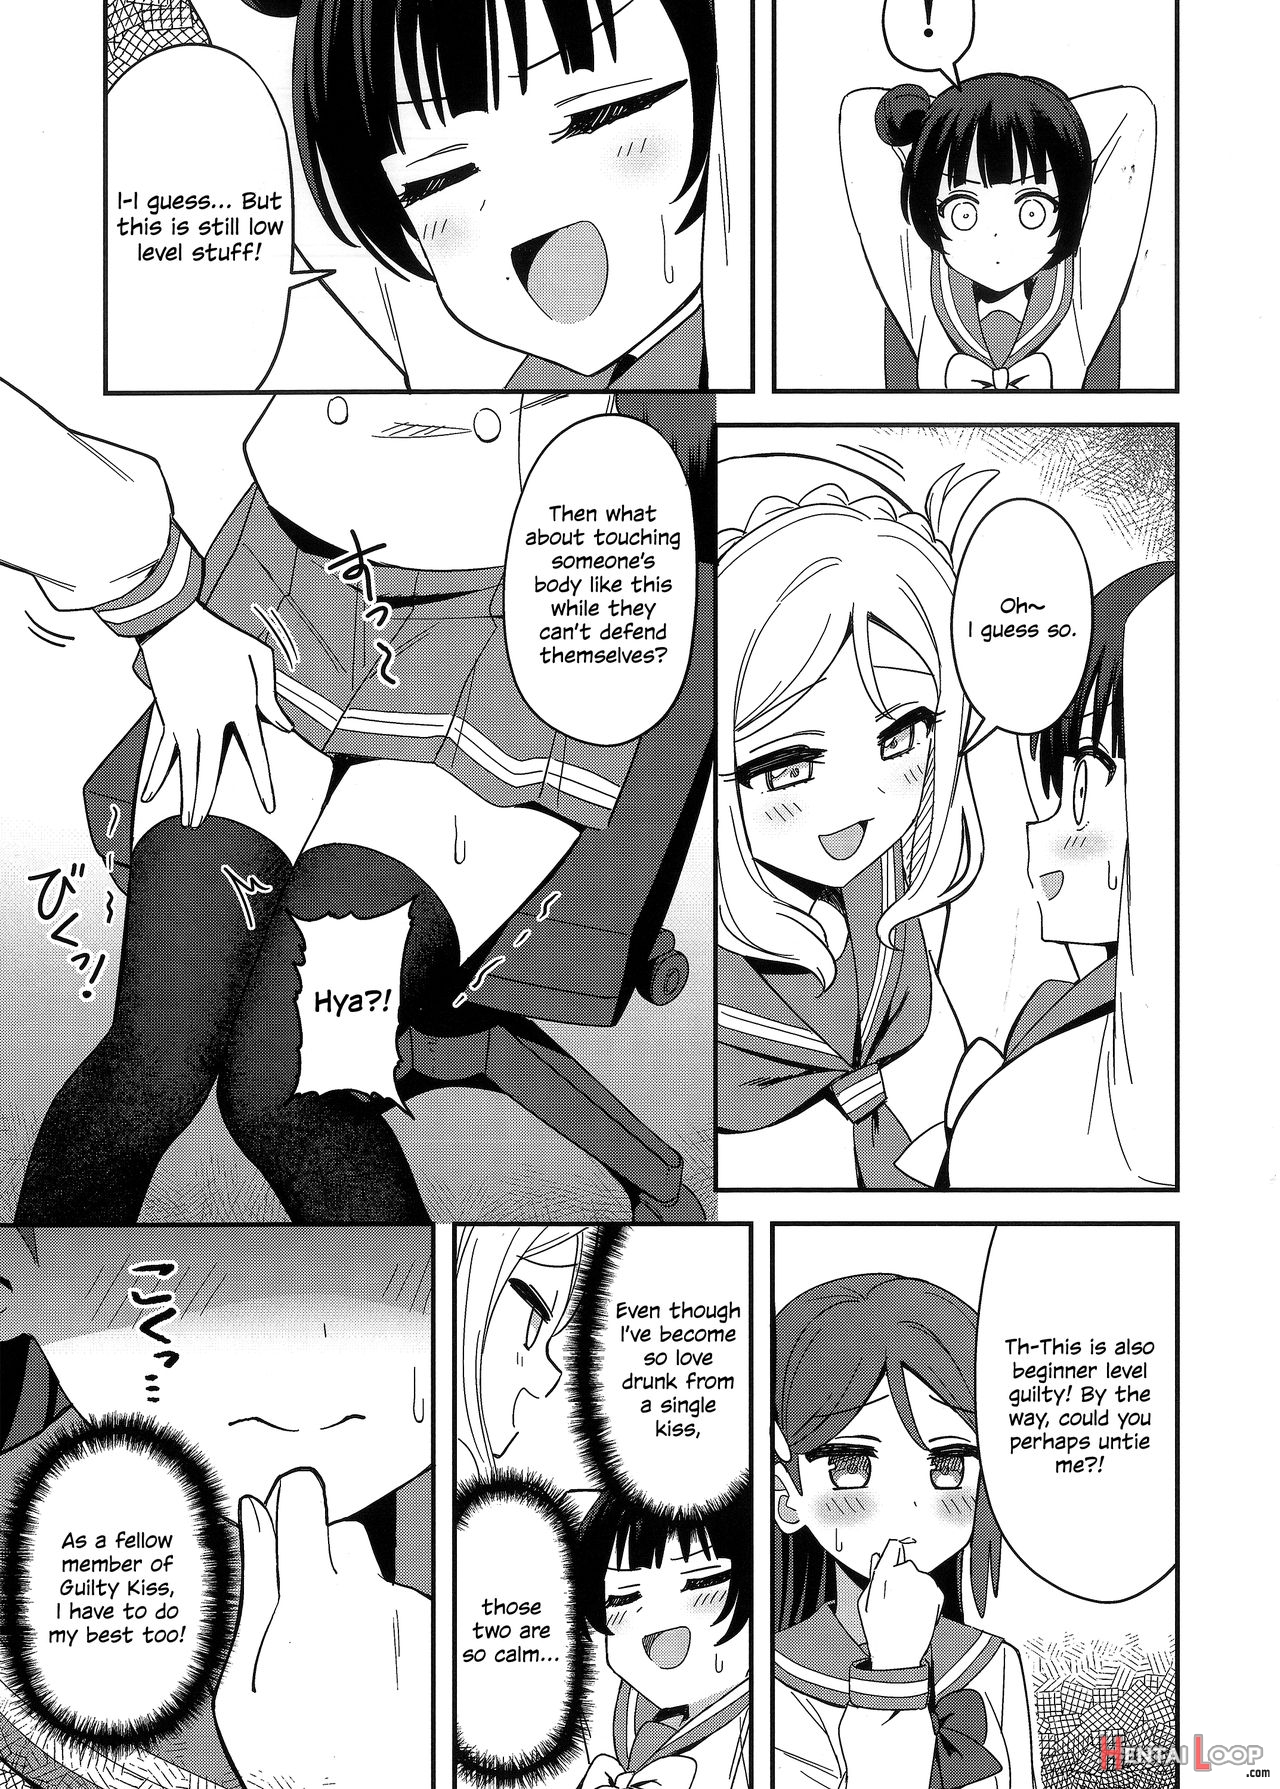 Fallen Angel-sama, Is This Guilty Too? page 8